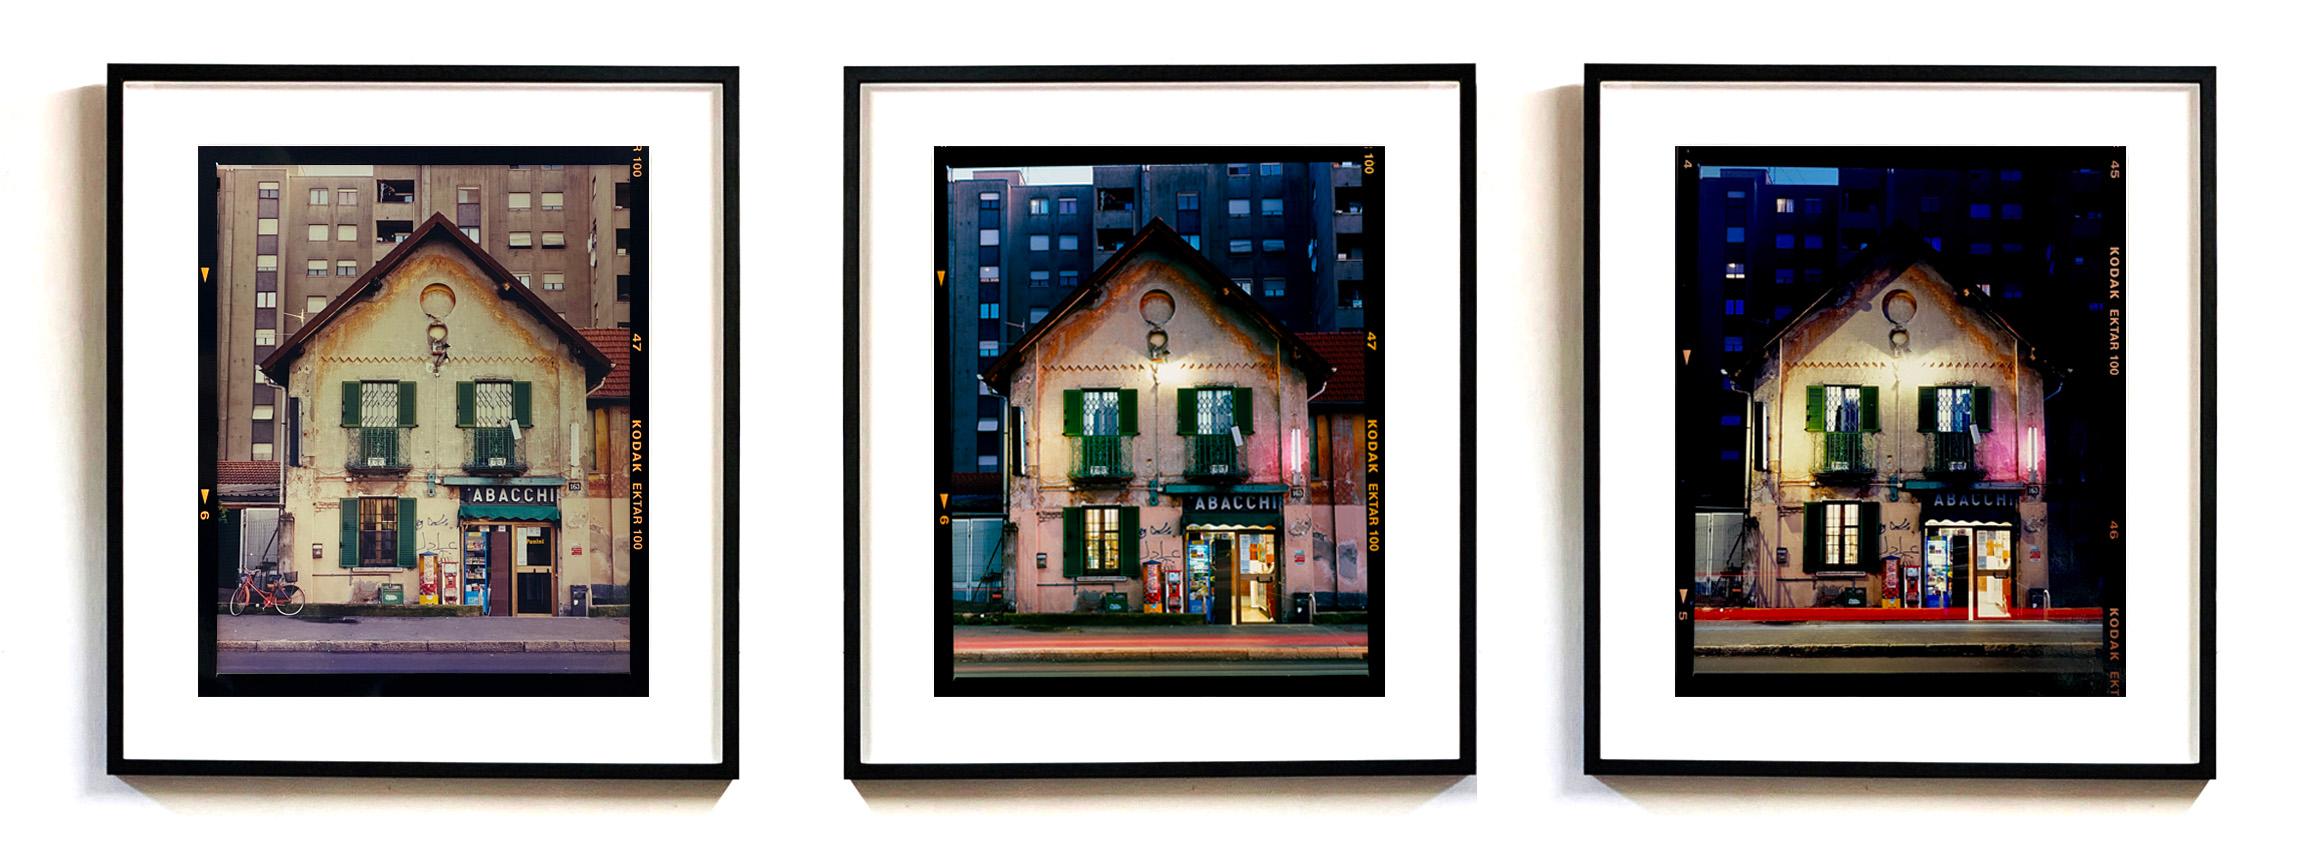 Richard Heeps Color Photograph - TABACCHI, Milan - Time Lapse Set of Three Framed Italian Architecture Photograph